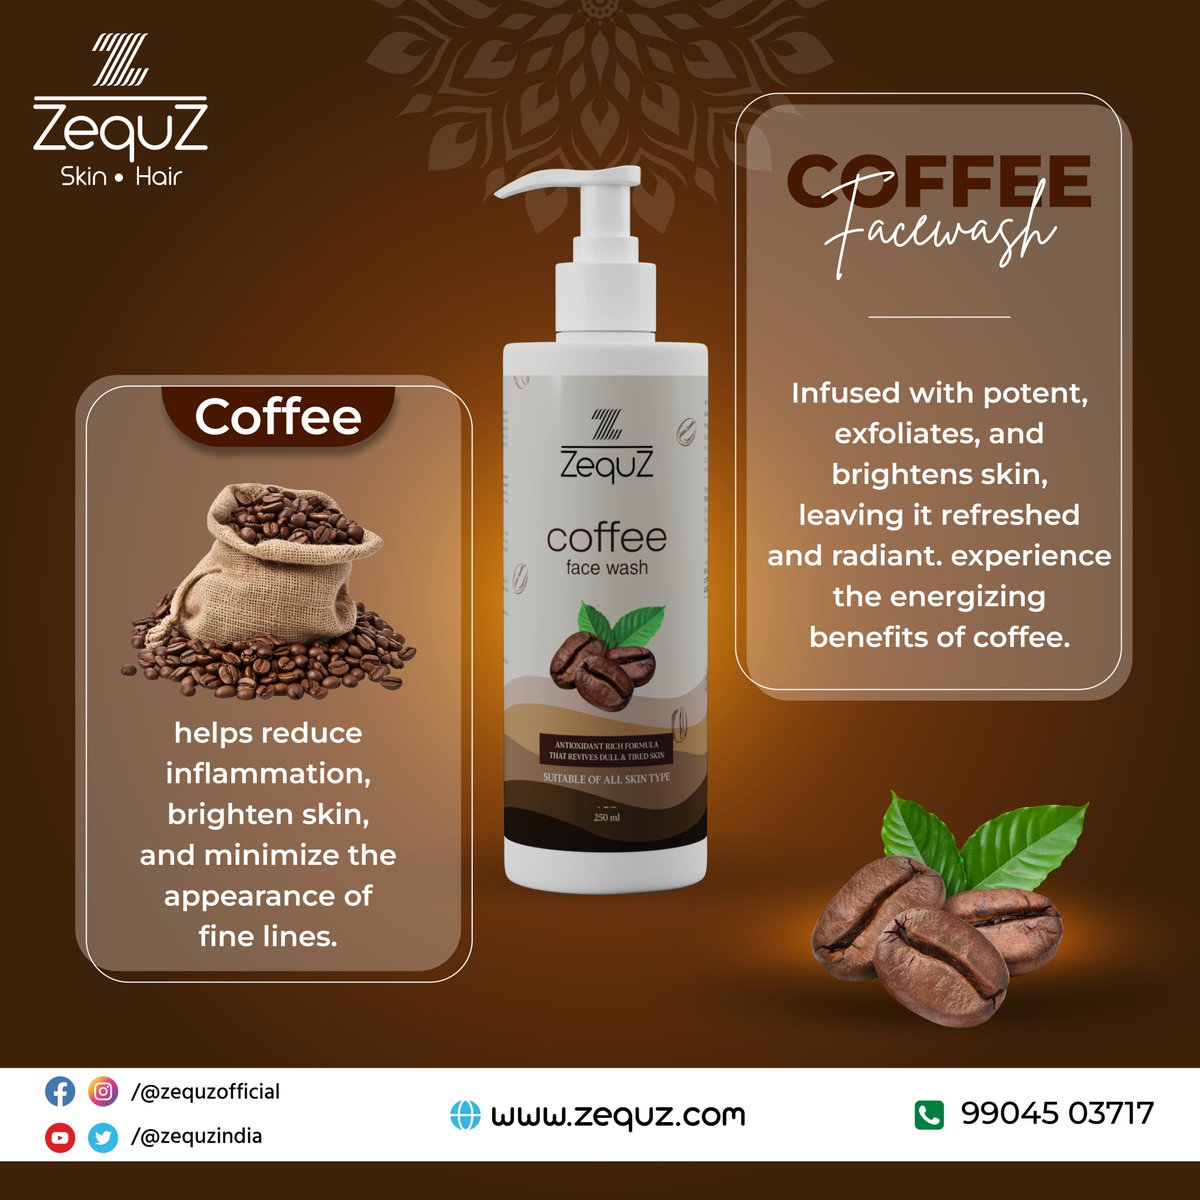 Try Our natural ingredient products for best results!
Shop now:Link in Bio

#papaya #Aqua #coffee #neemtulsi #facewash #skincare #beautyproducts #healthyskin #dailyuseonlyzequz